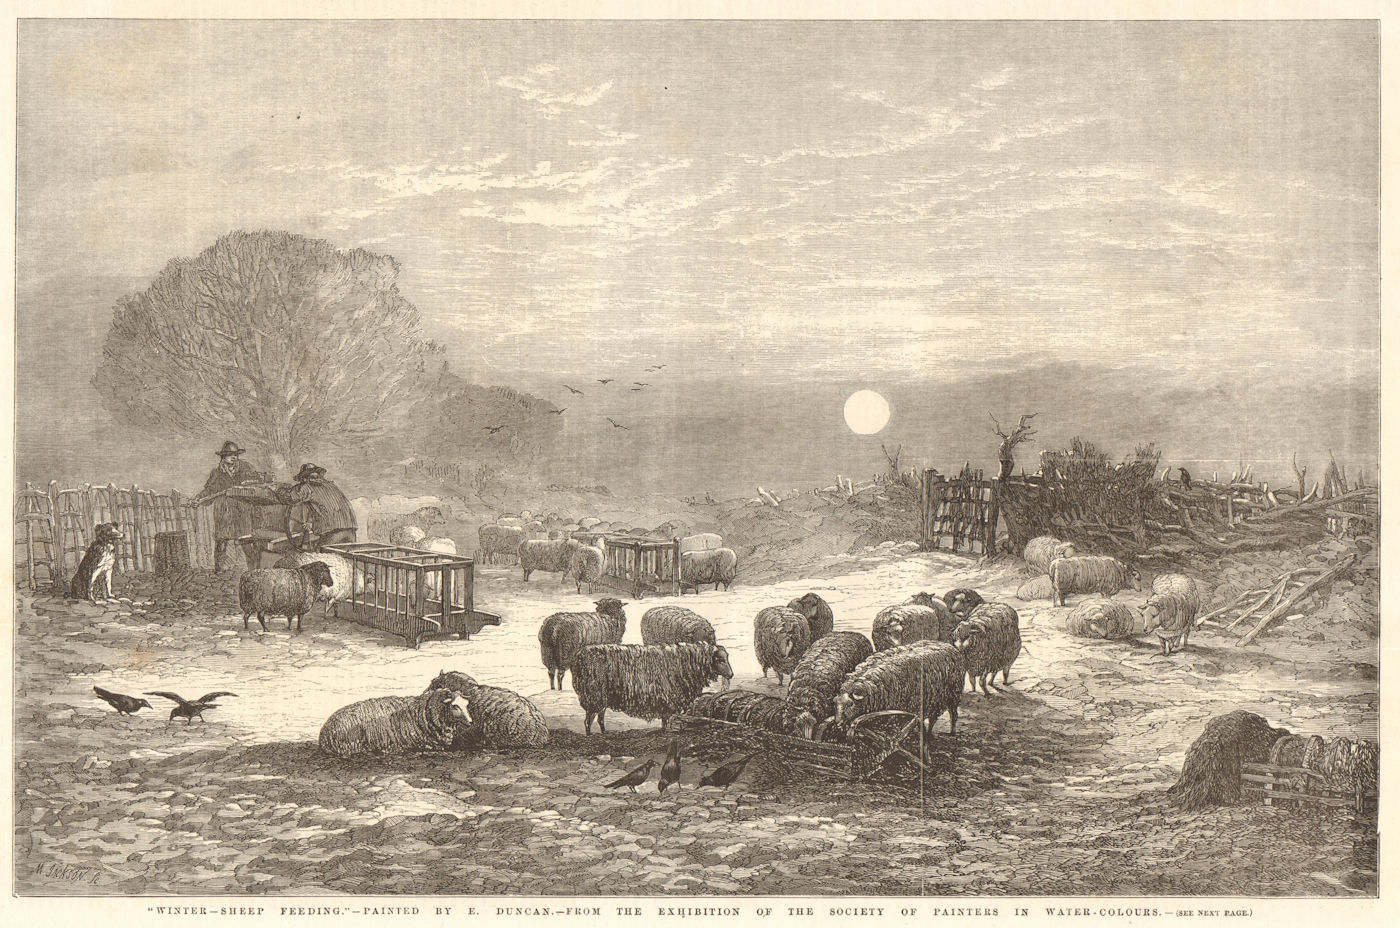 Associate Product "Winter - sheep feeding" - by E. Duncan. Farming 1857 antique ILN full page